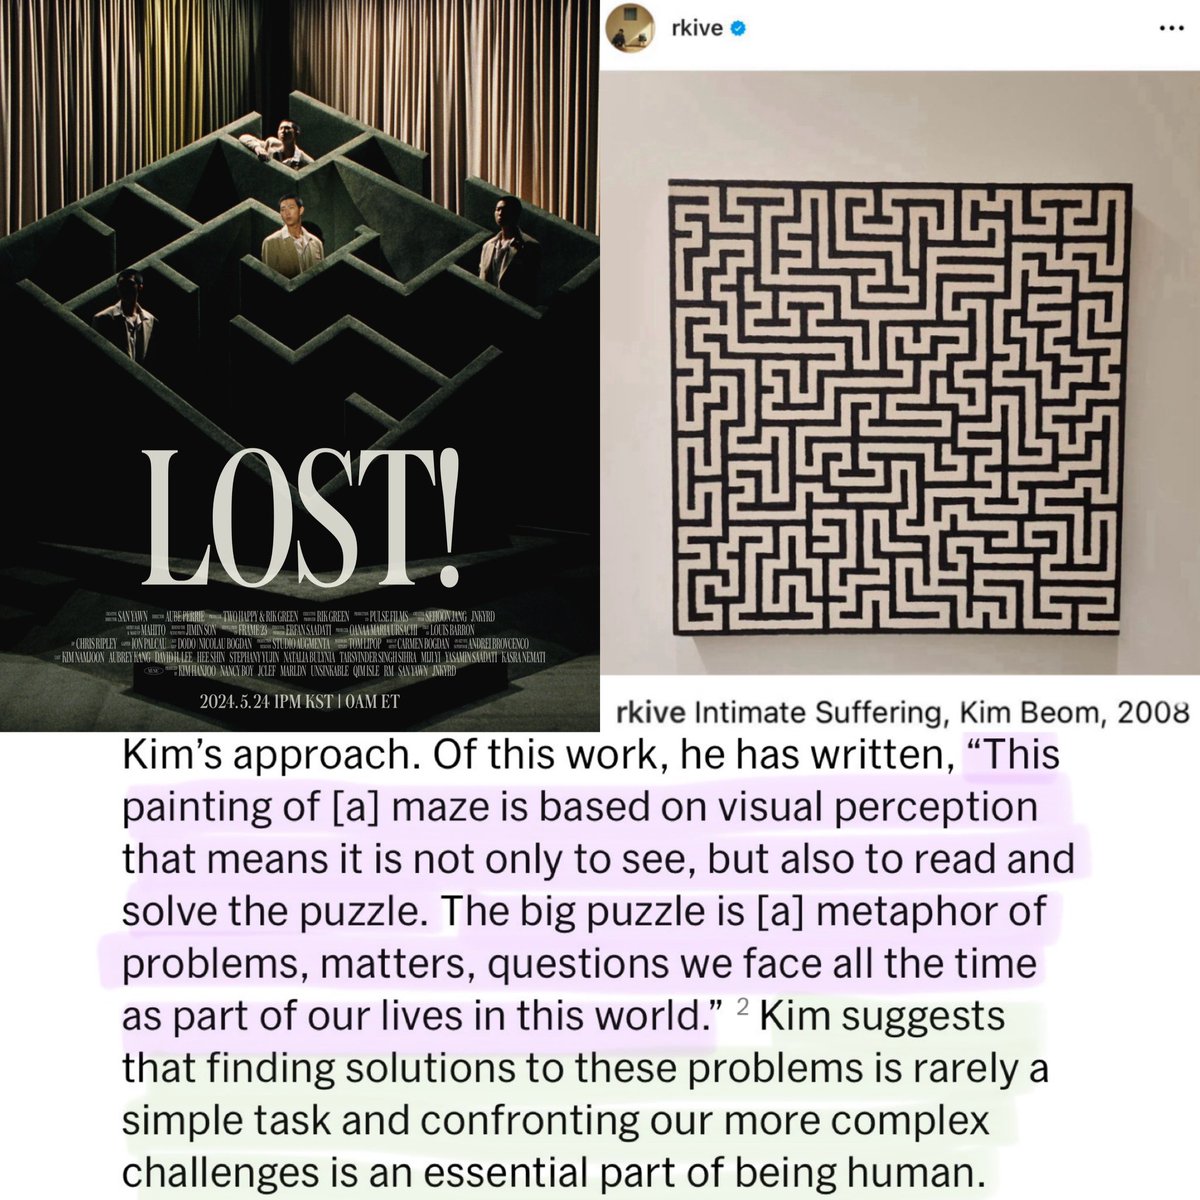 #RM_LOST Kim Beom, Intimate Suffering, 2008

'..based on visual perception that means it is not only to see, but also to read and solve the puzzle. The big puzzle is [a] metaphor of problems, matters, questions we face all the time as part of our lives in this world.'